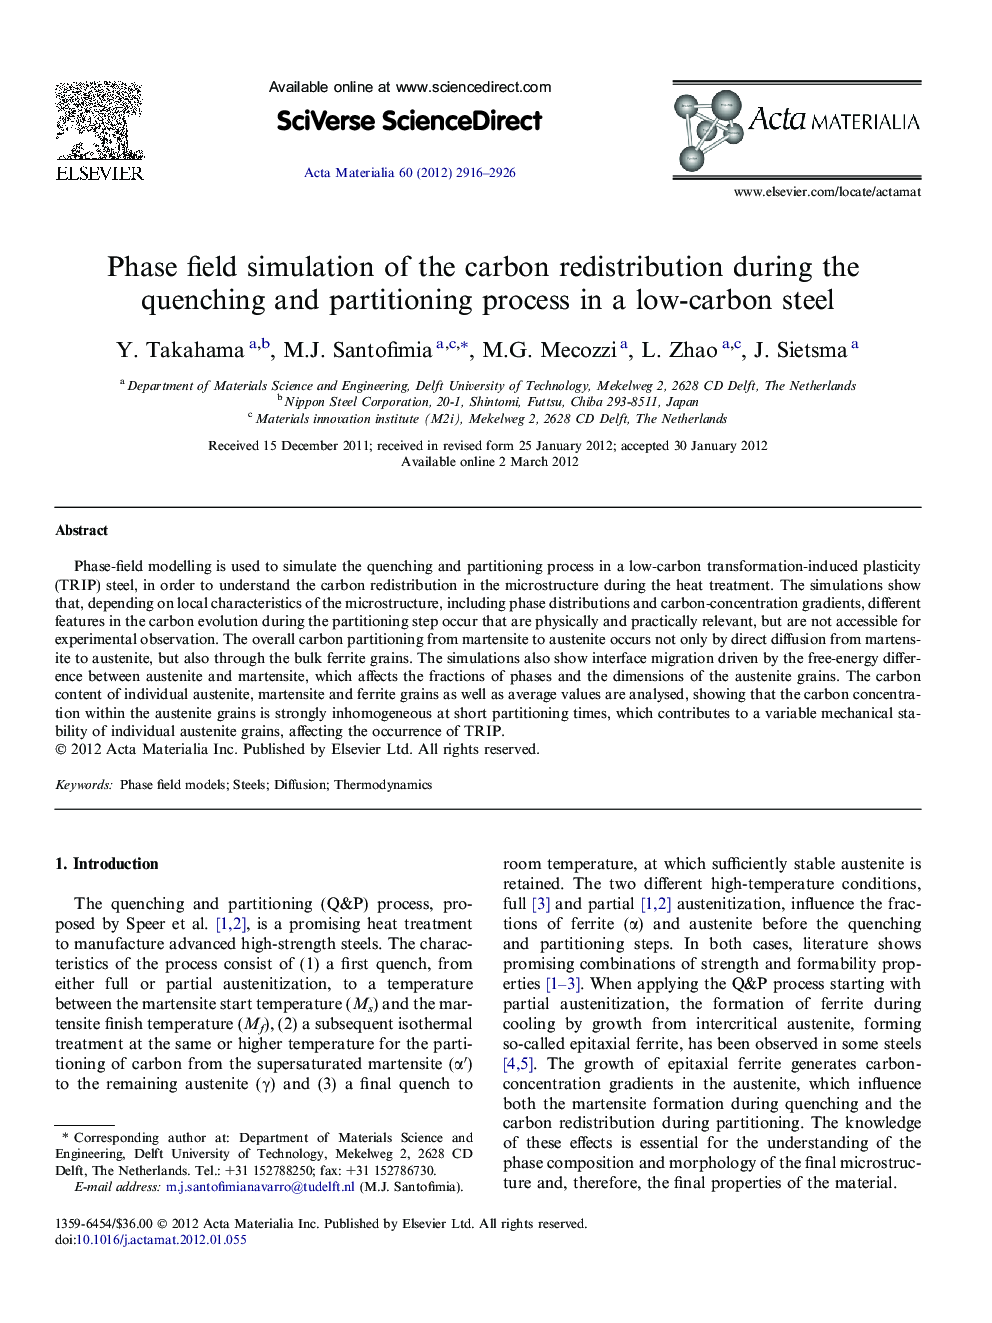 Phase field simulation of the carbon redistribution during the quenching and partitioning process in a low-carbon steel